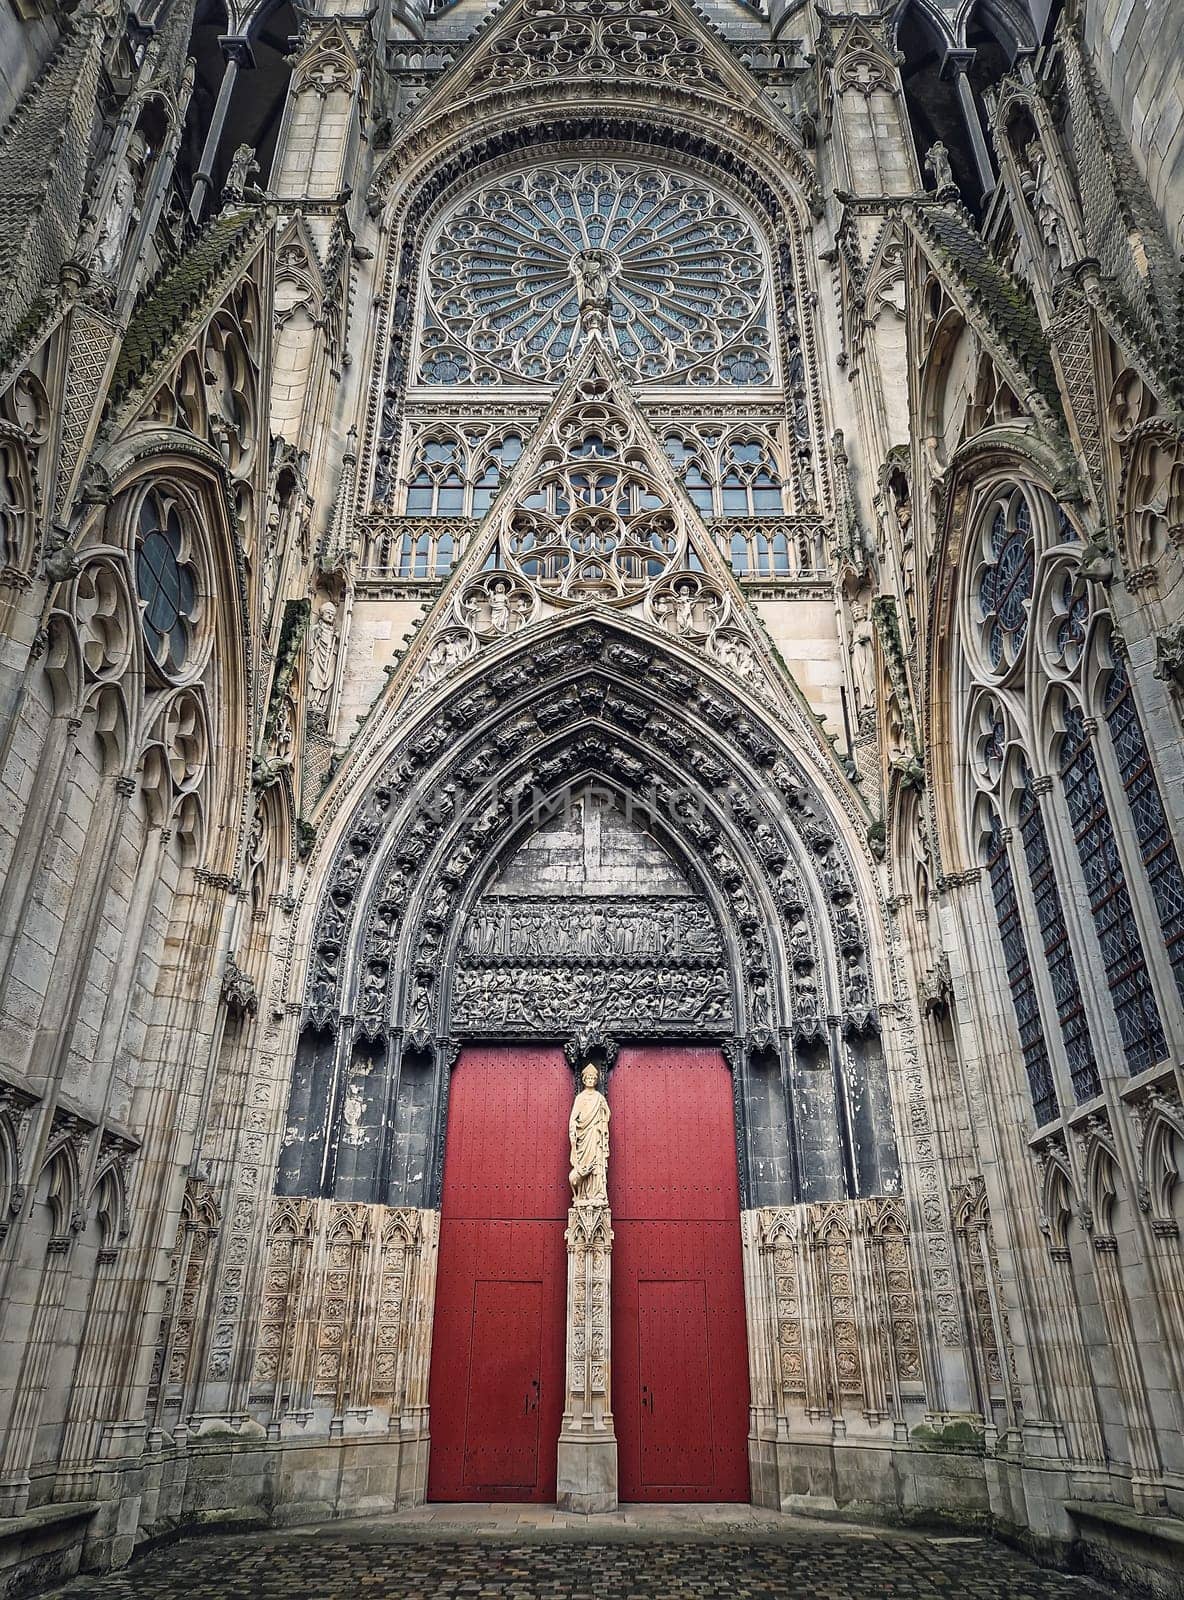 Notre Dame de Rouen Cathedral side entrance door. Architectural landmark facade details featuring styles from Early Gothic to late Flamboyant and Renaissance architecture, Normandy, France